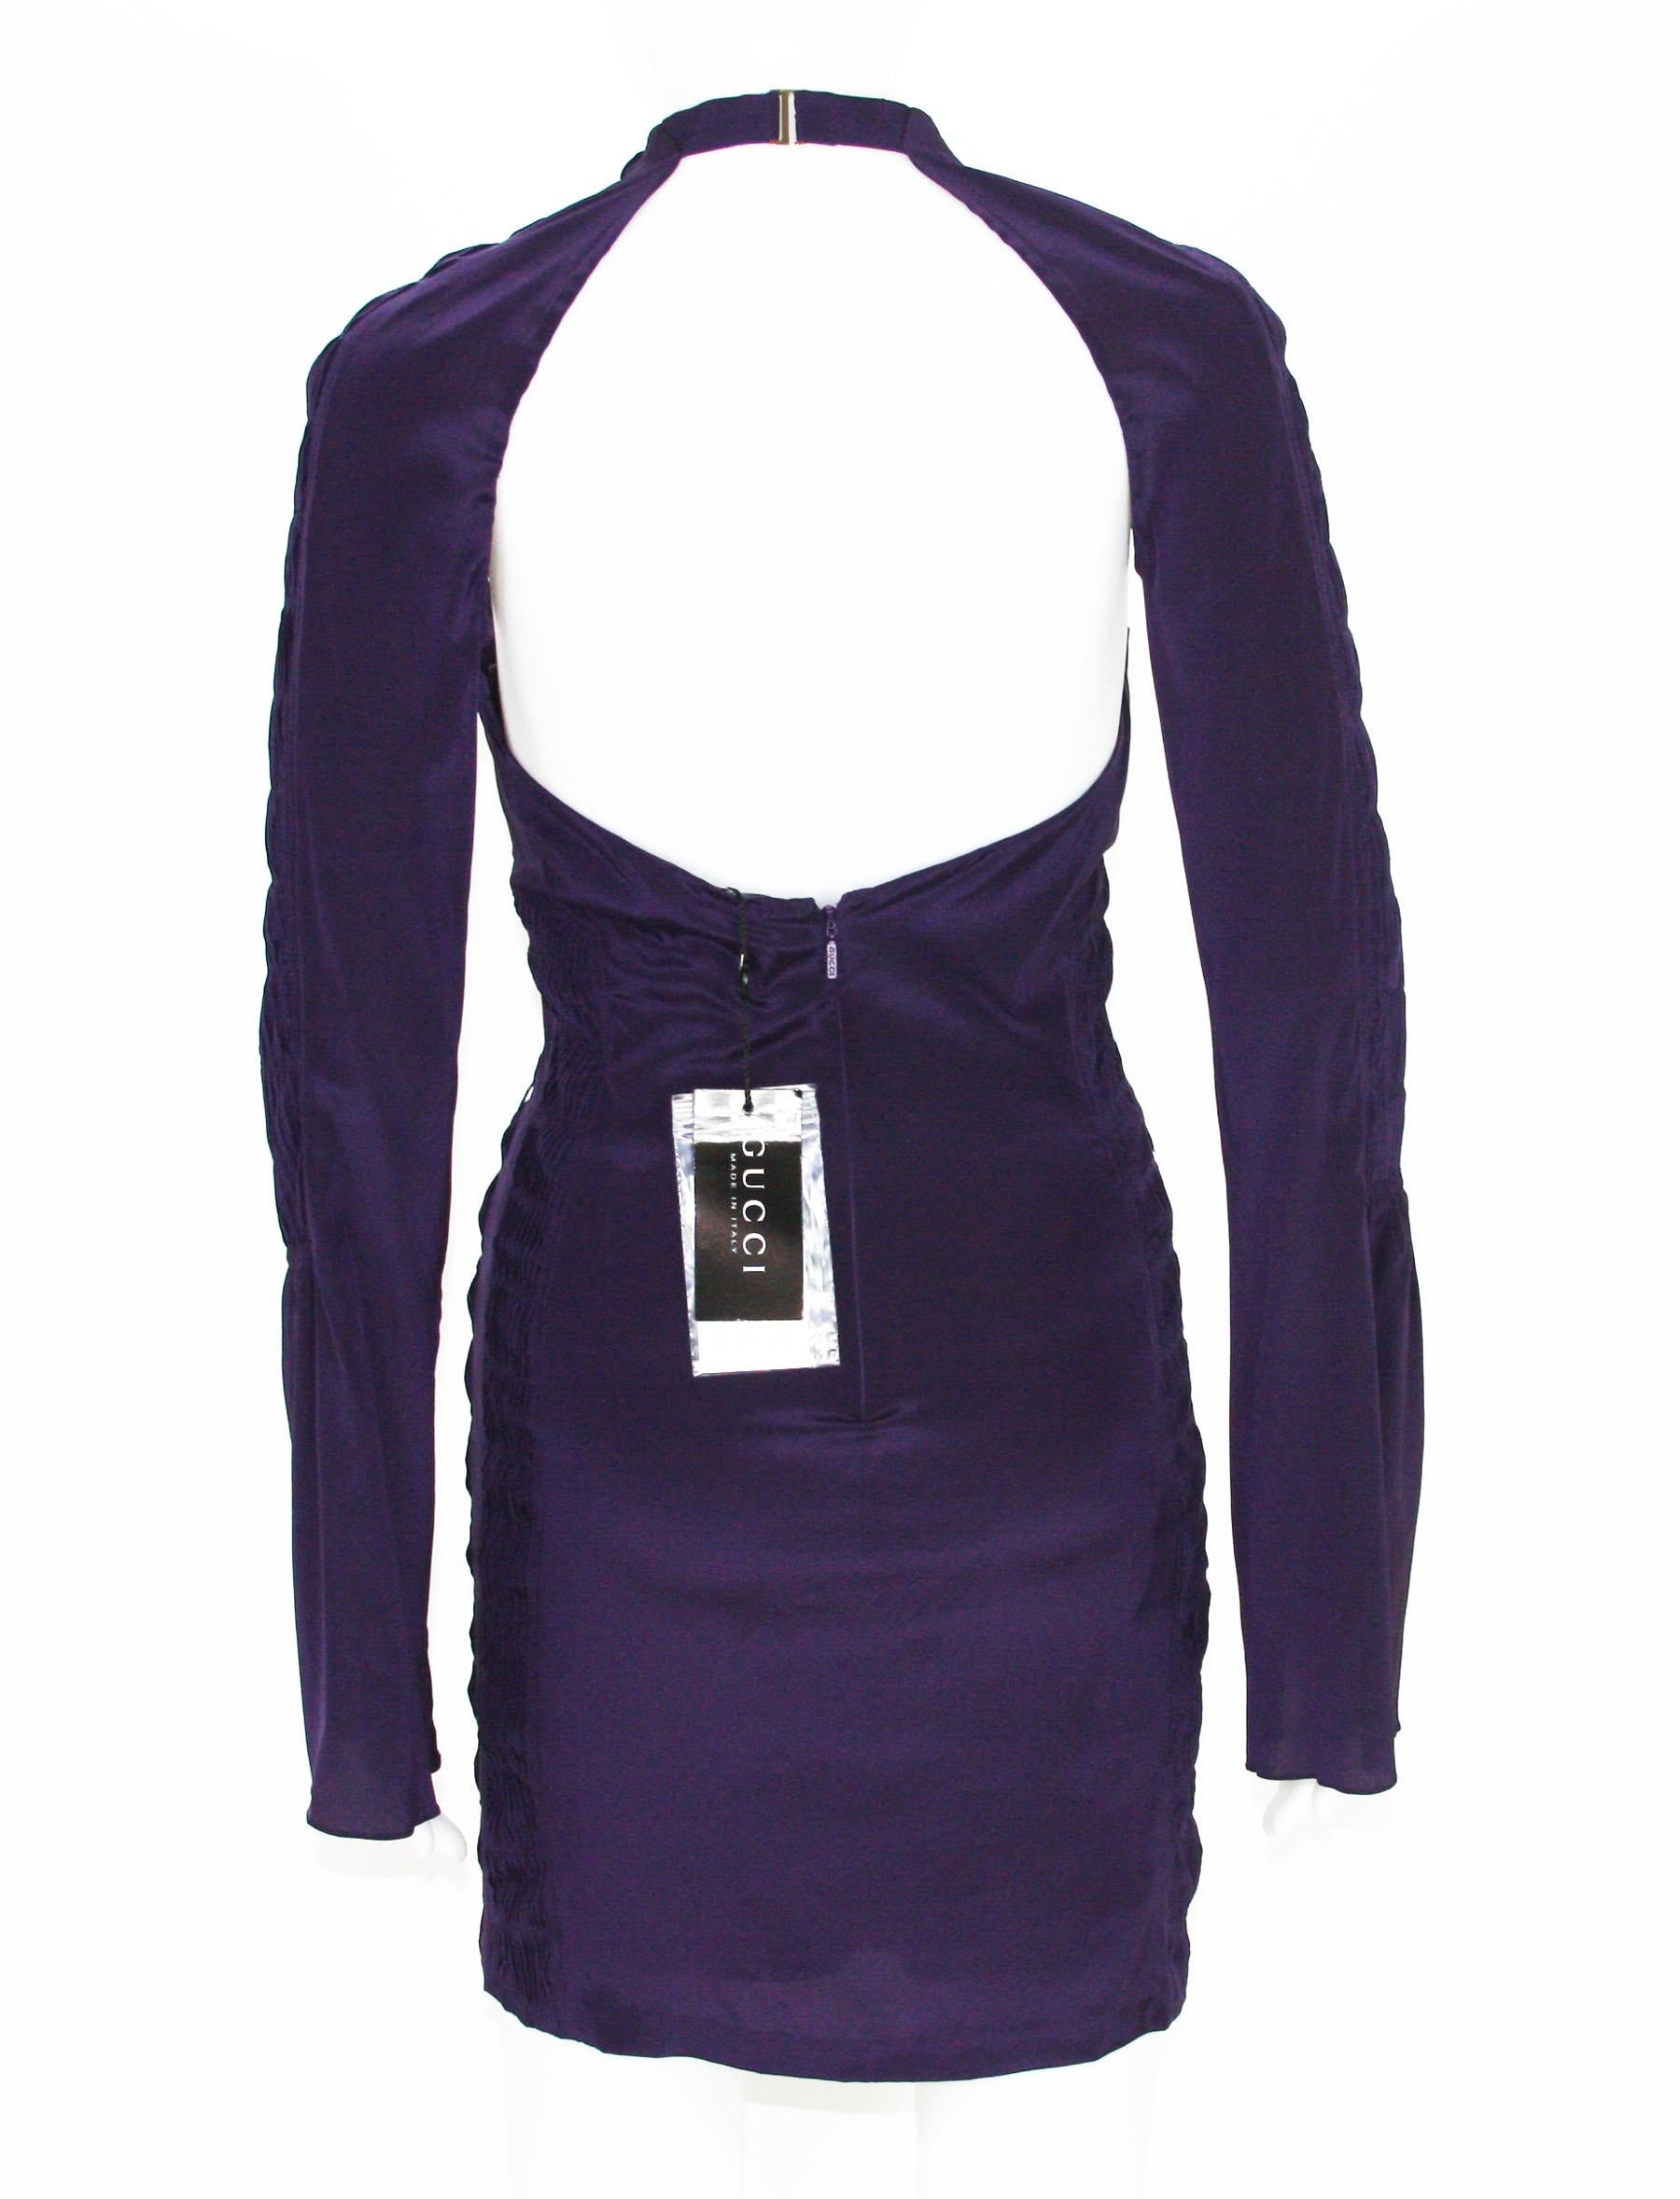 New Tom Ford for Gucci Plunging Backless Mini Sexy Dress
S/S 2004 Collection
Designer sizes available - 38 and 44
90% Silk, 10% Spandex; Deep Purple Color, Cut-Out Detail, Bell Sleeve, Fully Lined, Open Back, Gathered Panels, Zip Closure.
Made in